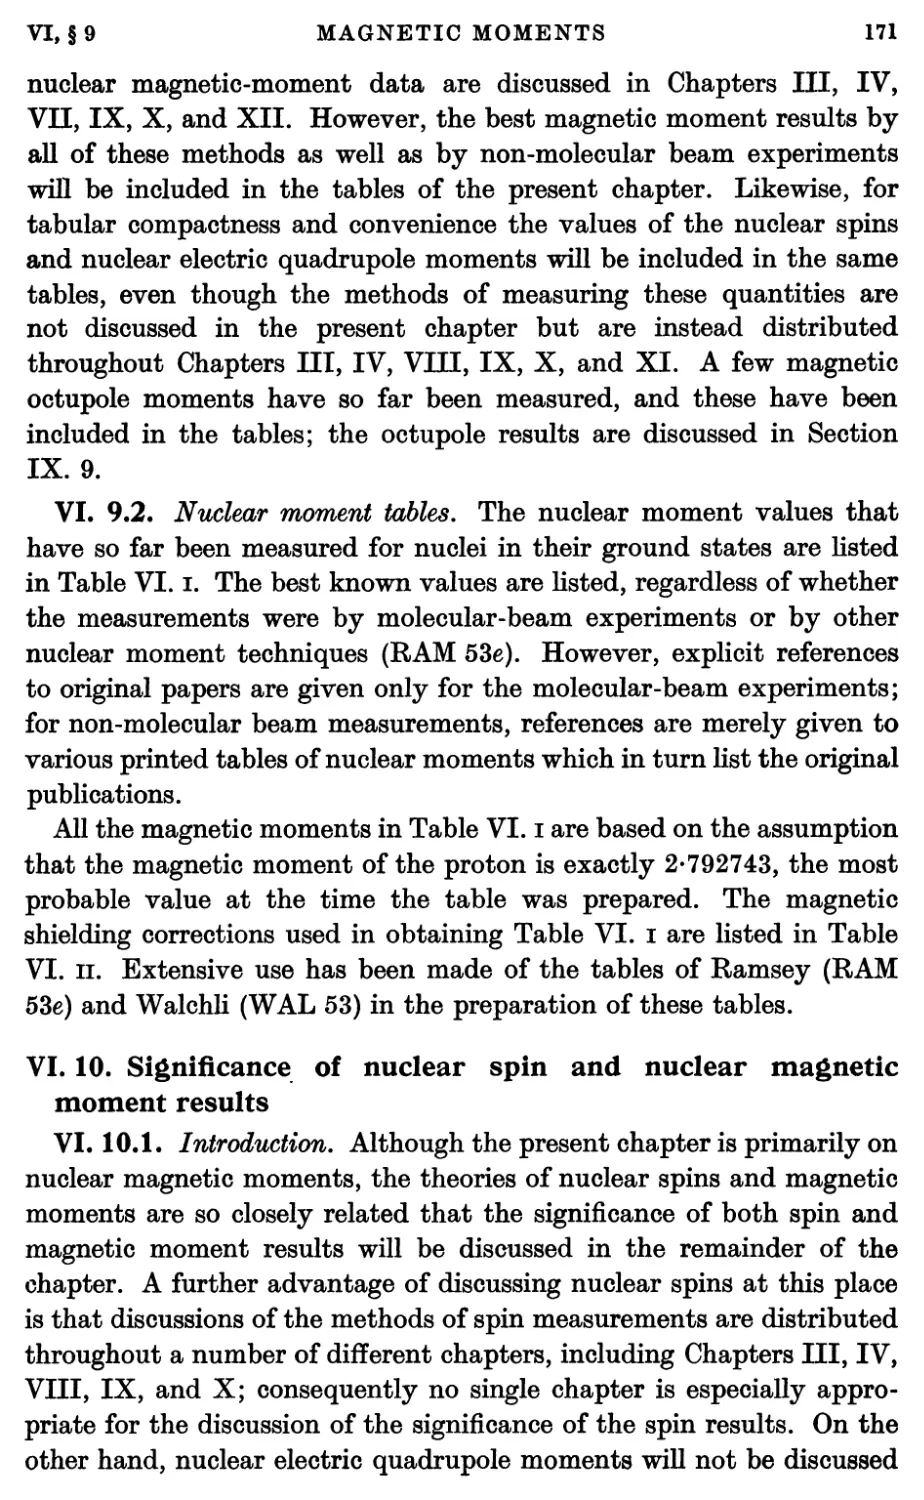 VI.9.2. Nuclear moment tables
VI.10. Significance of Nuclear Spin and Nuclear Magnetic Moment Results